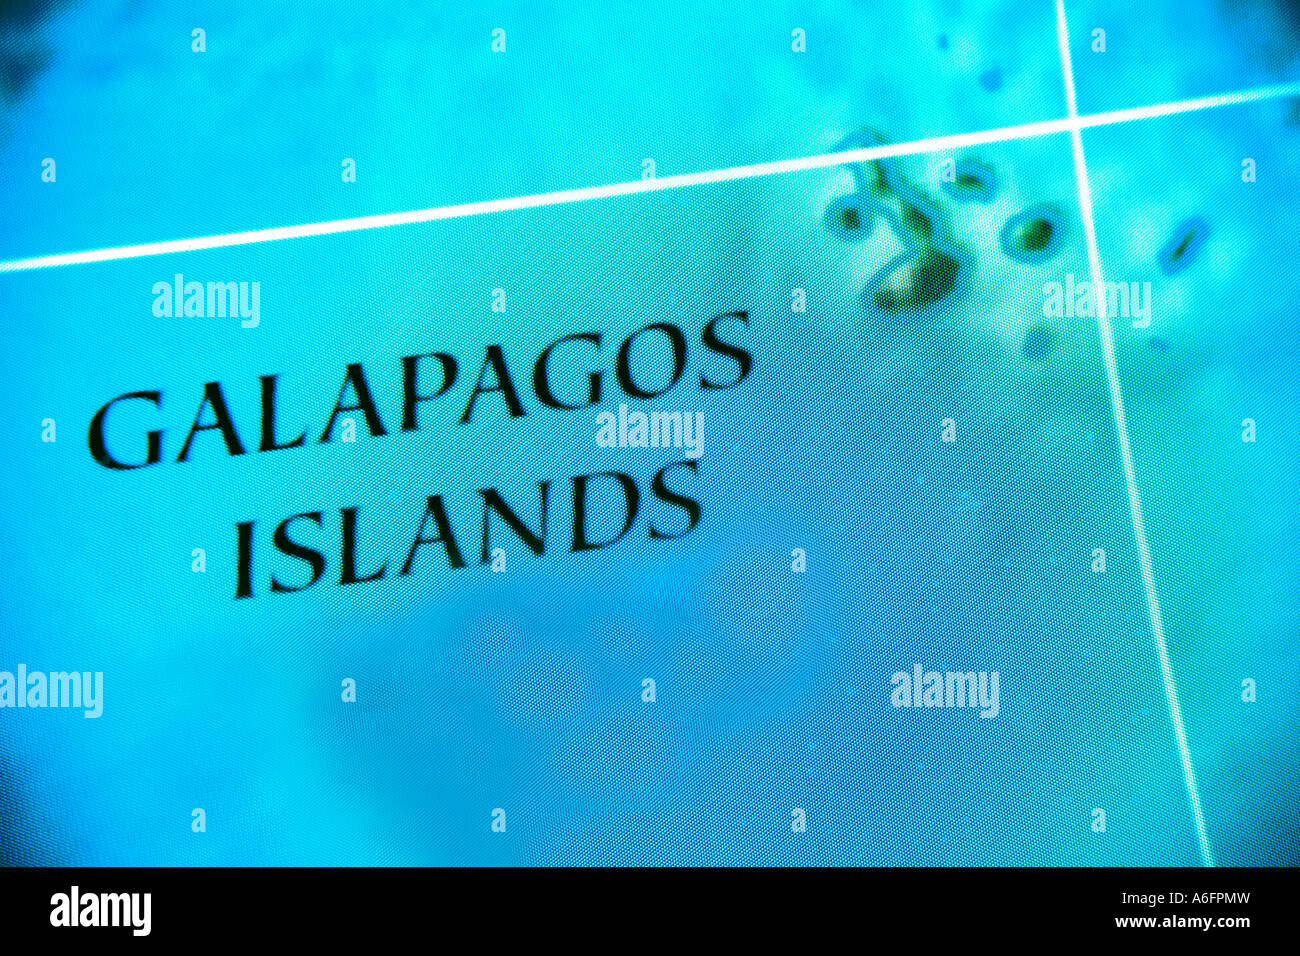 Mappa delle Isole Galapagos Foto Stock